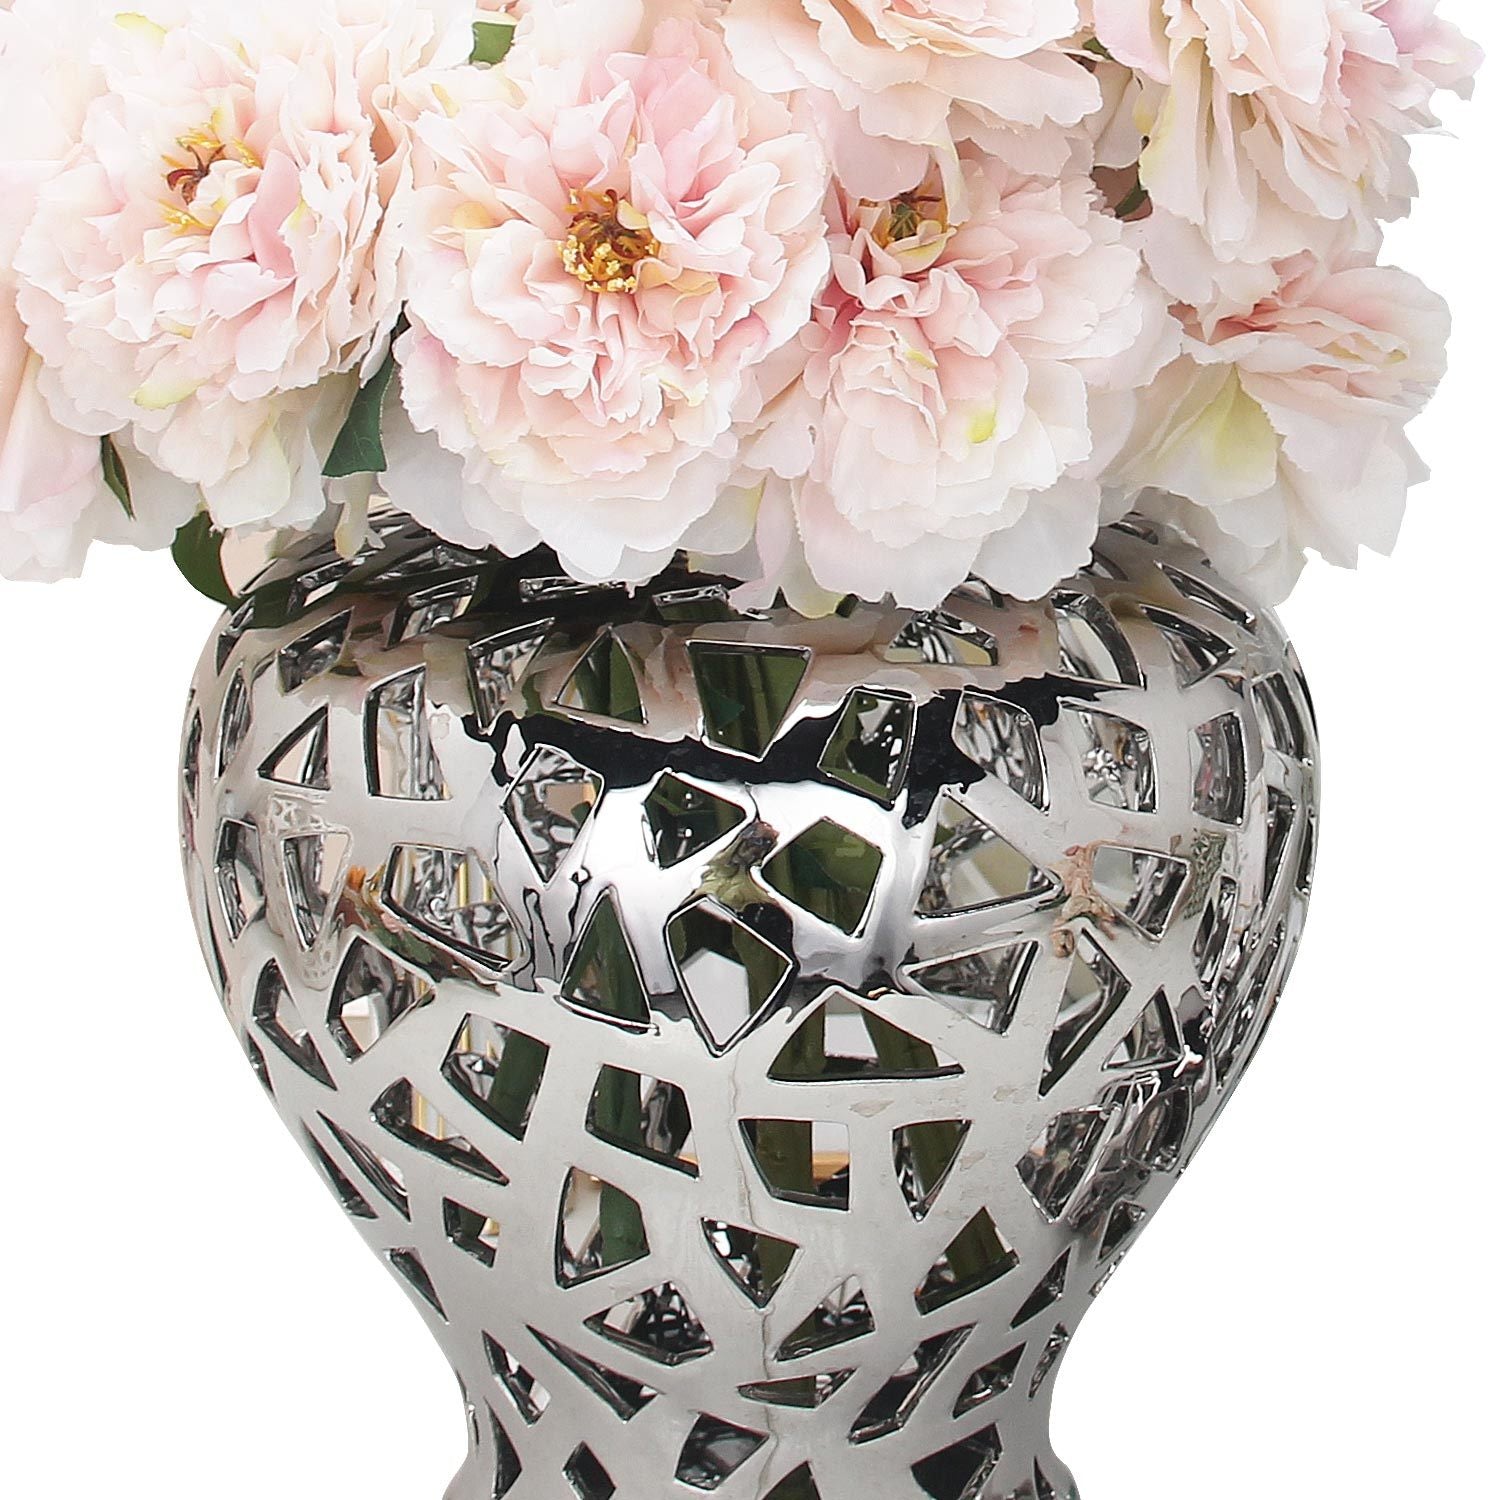 A decorative object, the Silver Ceramic Ginger Jar Vase with Decorative Design adds an element of decor style to any space.